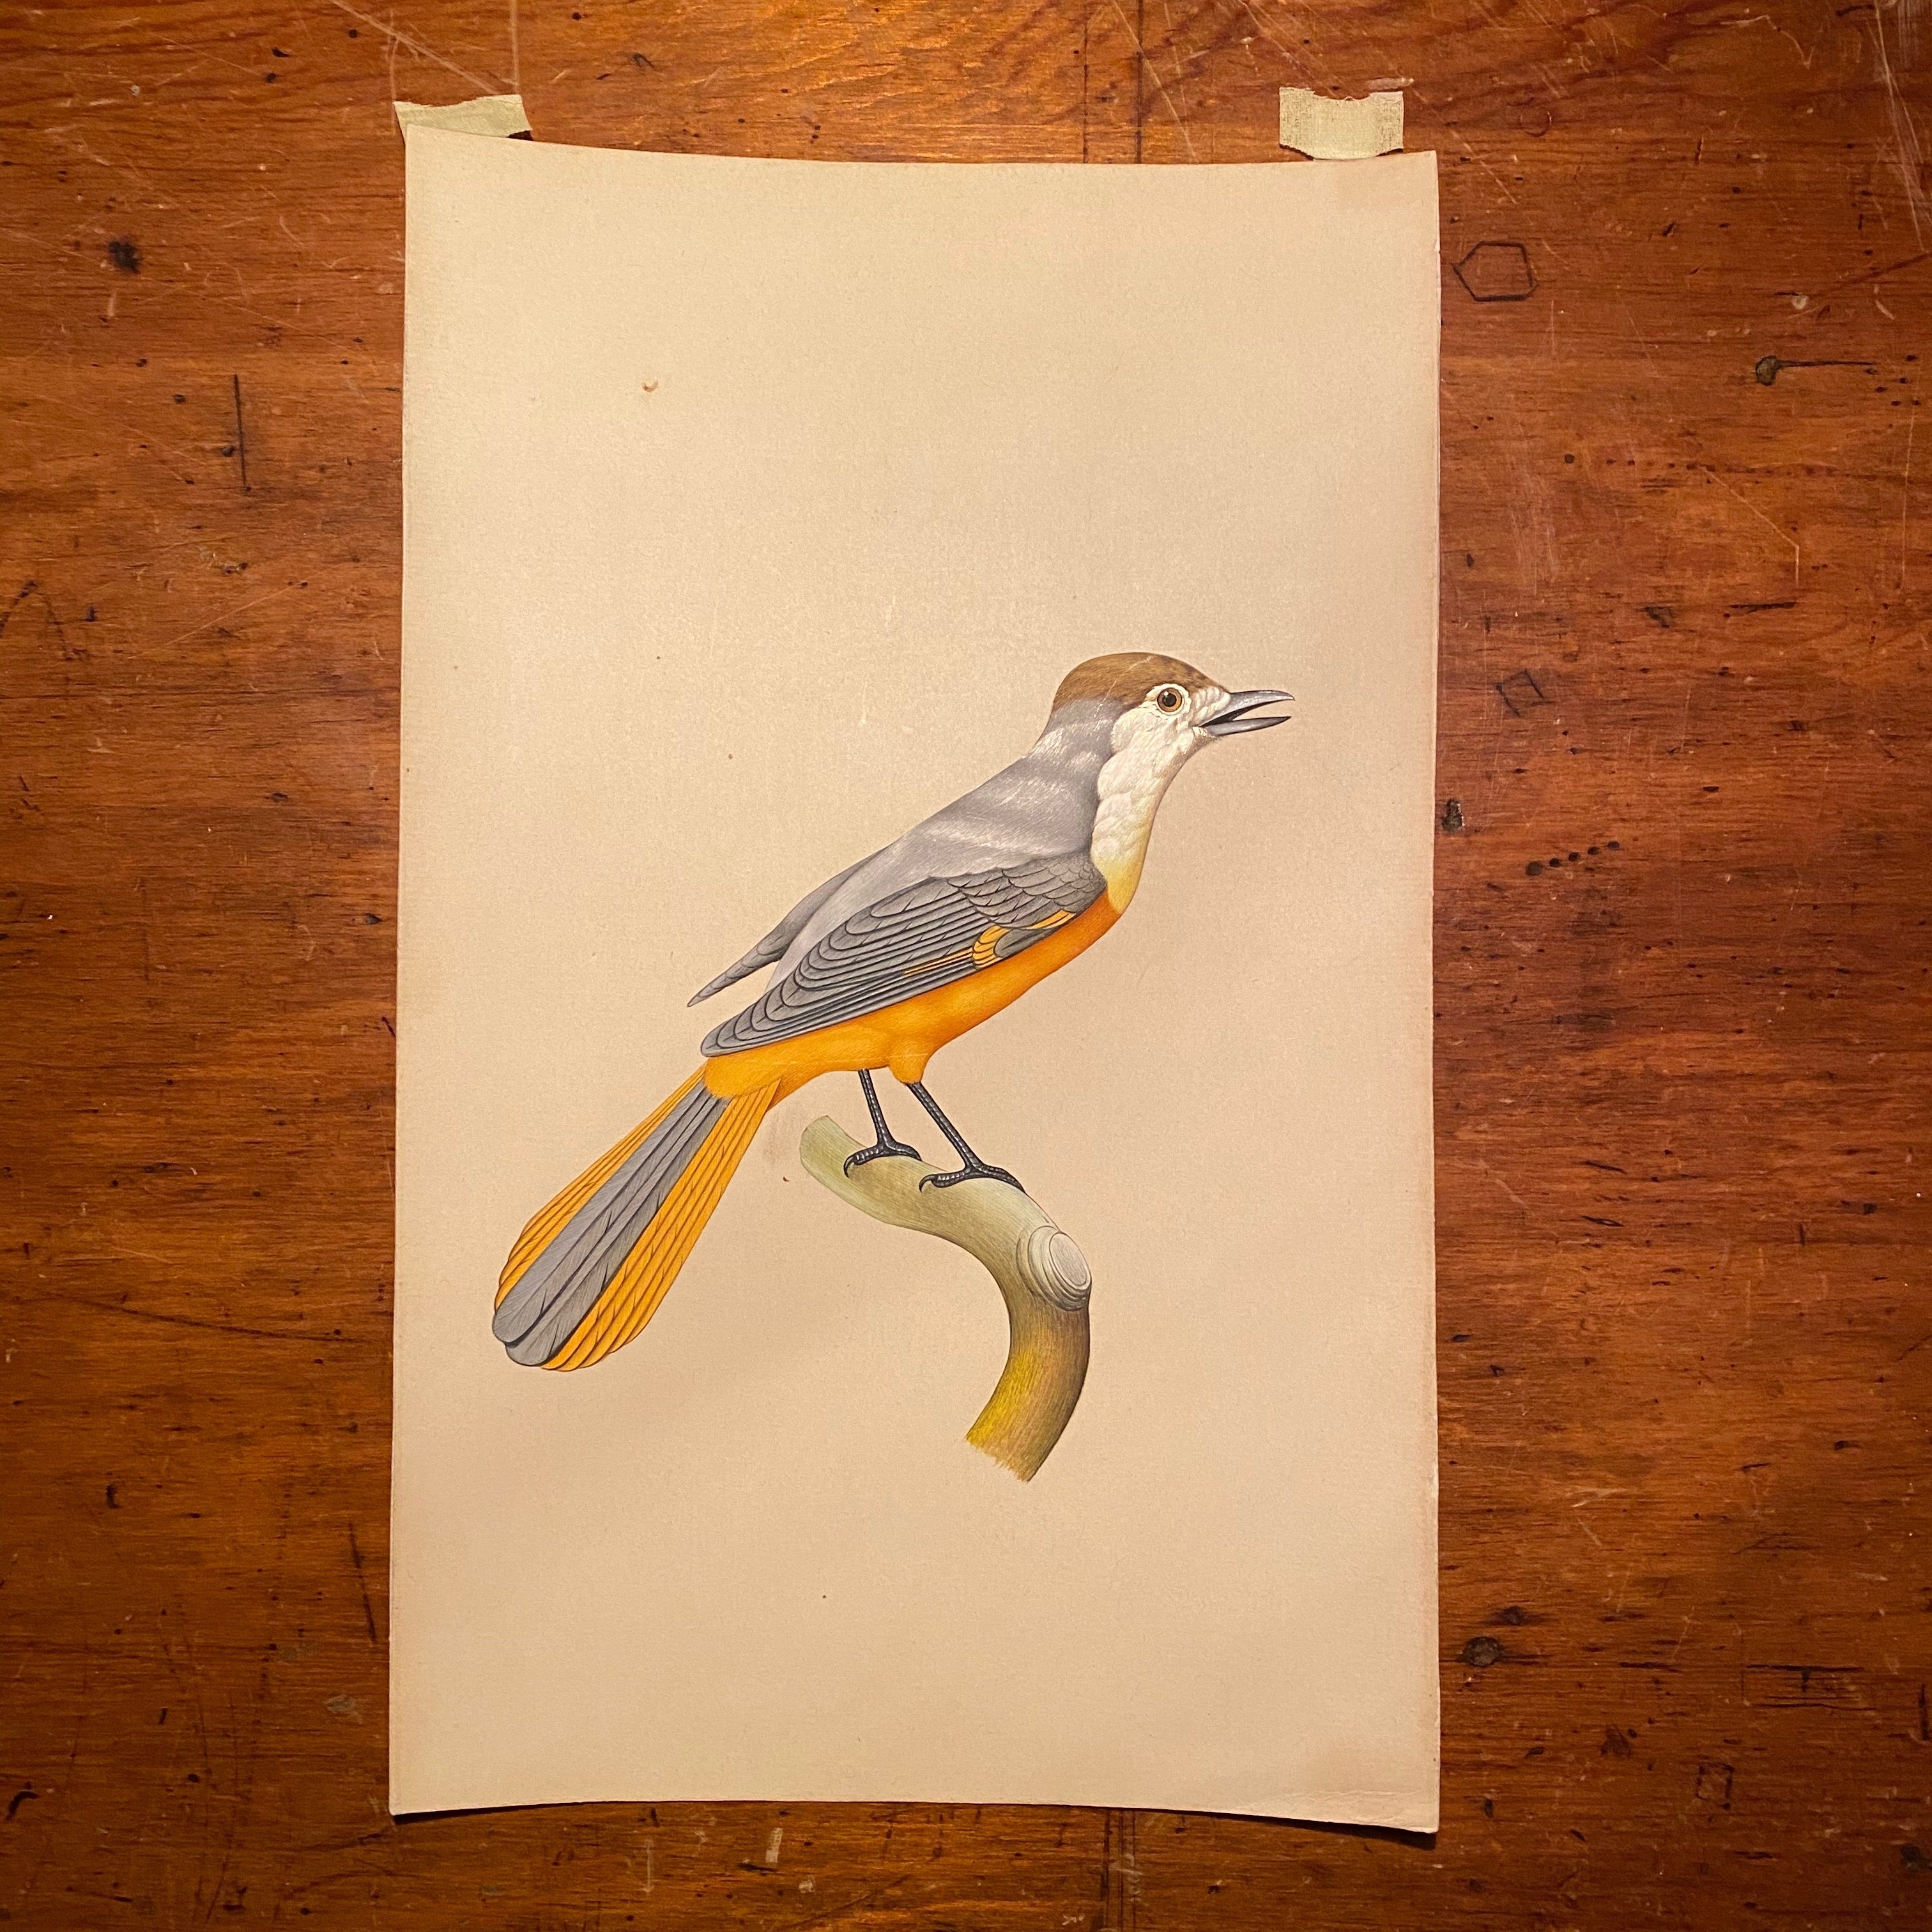 Bird Watercolor Paintings after Jacques Barraband (1767 - 1809) - Set of 2 - 1970s? - Petit Rollier - Geat Orange - Mystery Artist